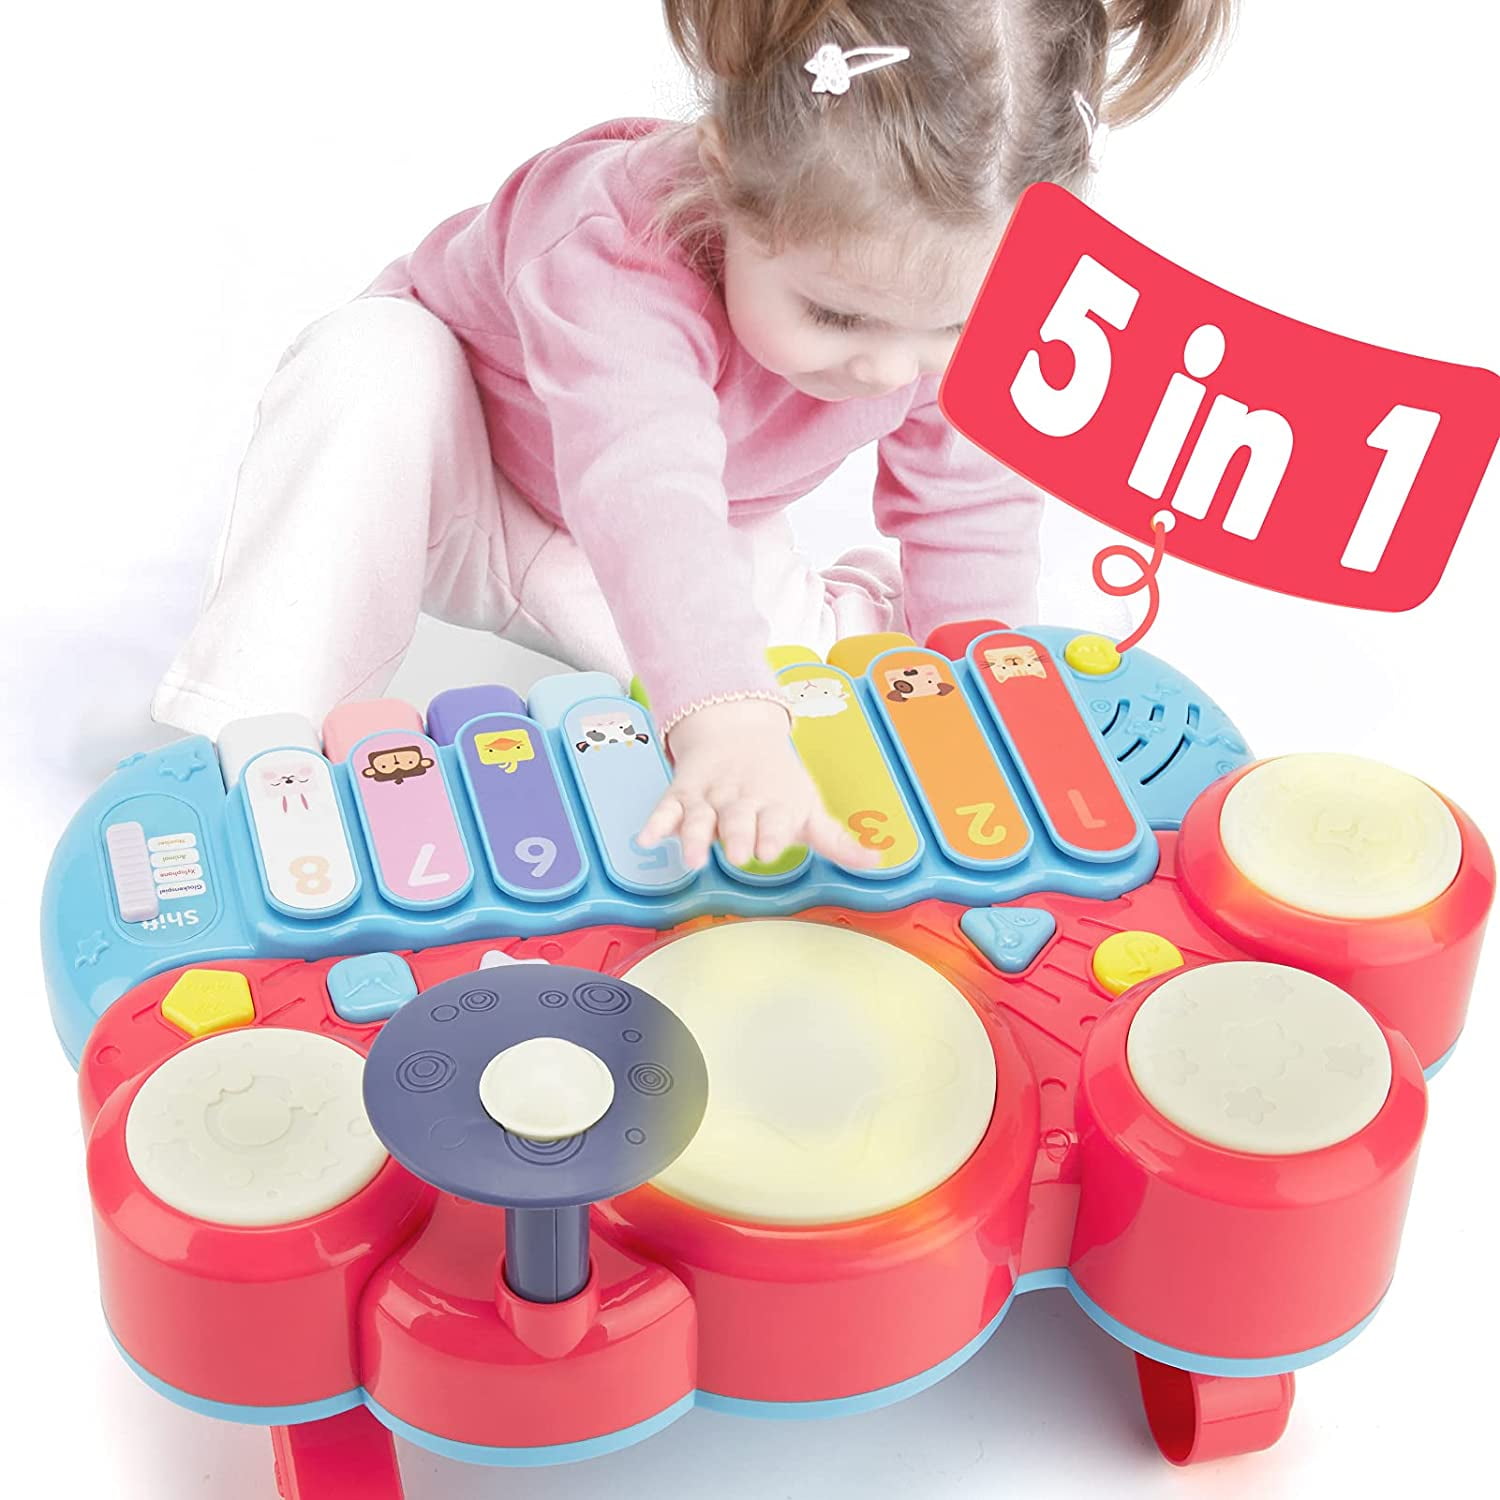 Musical Kids Drum Play Baby Children Colorful Lights Music Educational Toy Gifts